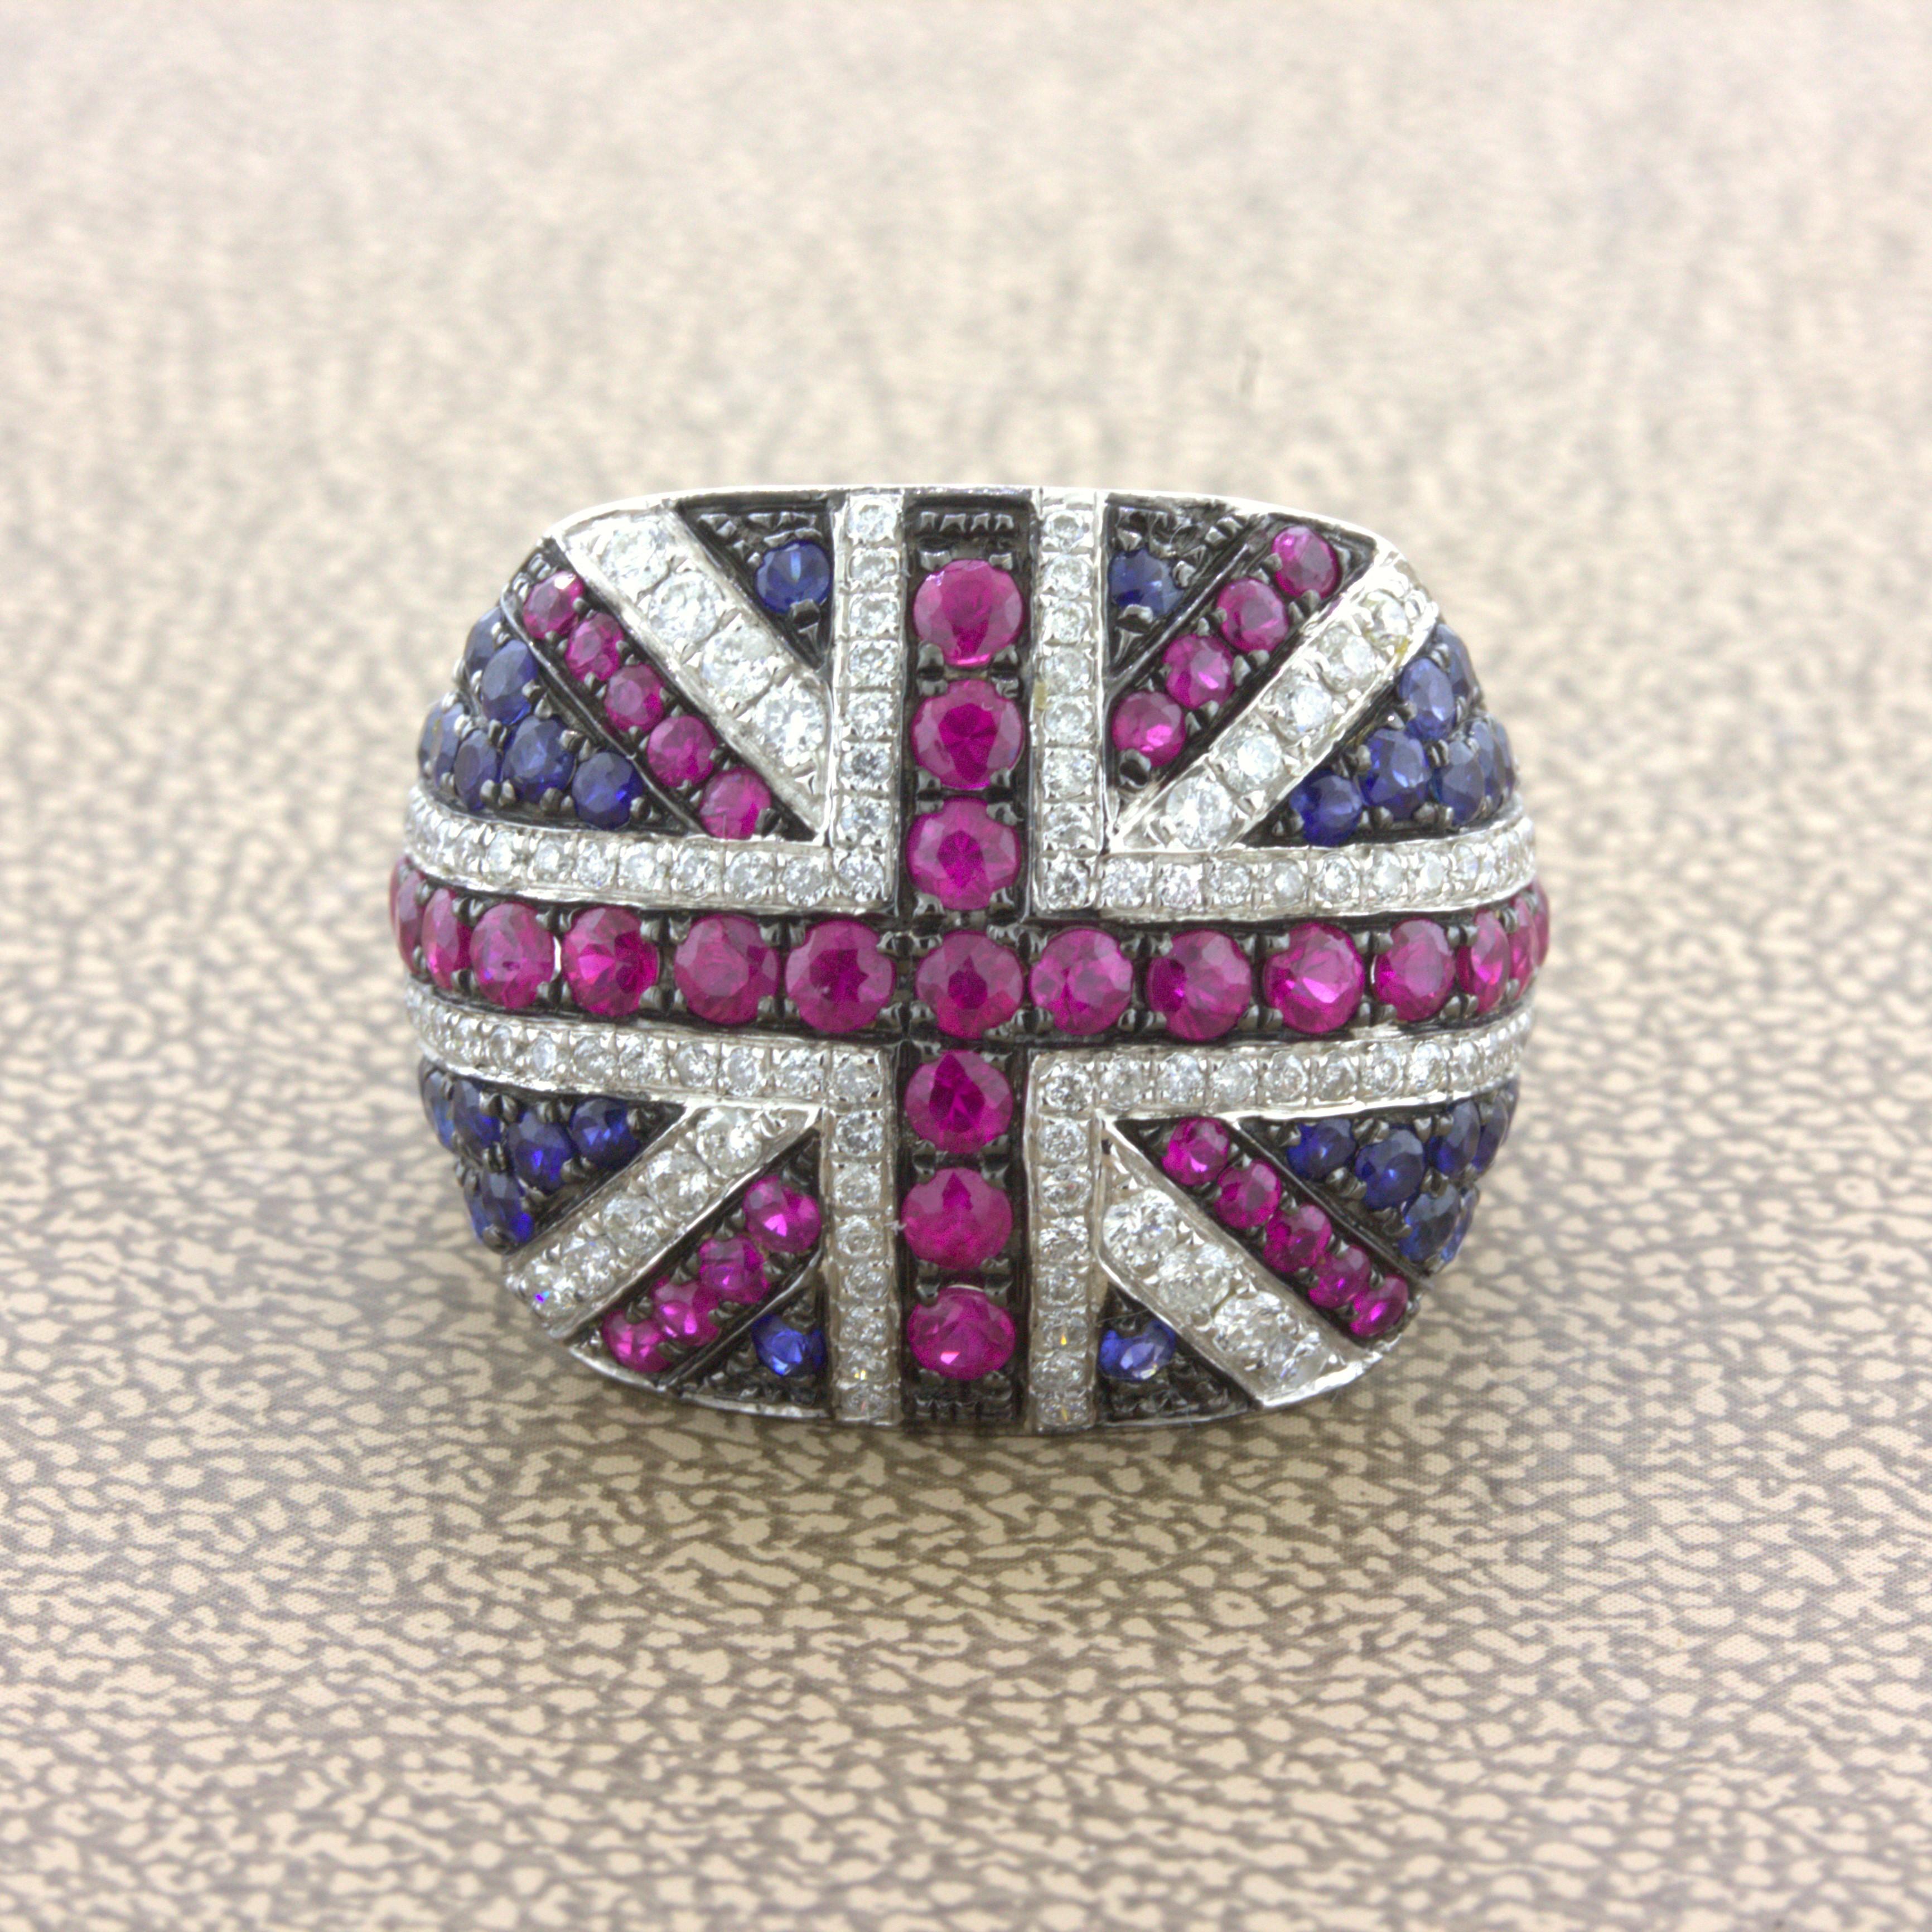 A lovely ring designed as the flag of the United Kingdom, the Union Flag. It features 1.25 carats of bright red rubies, 0.75 carats of vivid blue sapphires, and 0.55 carats of round brilliant-cut diamonds. Made in 18k white gold, this stylish piece